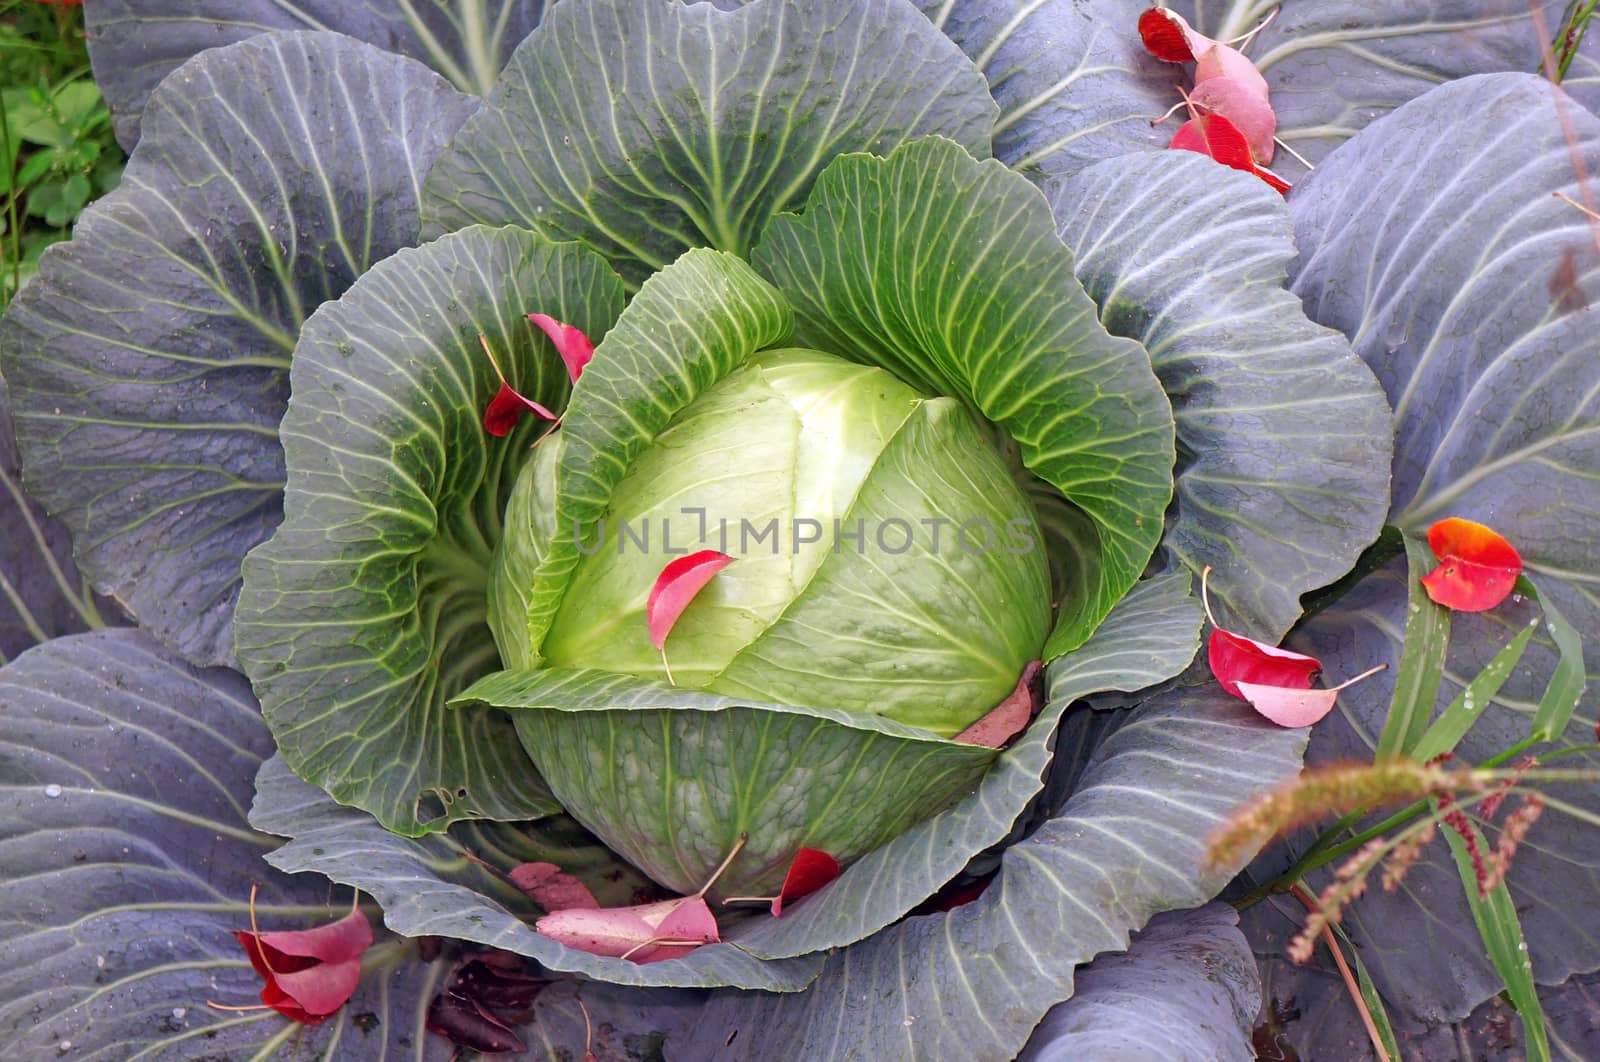 Green cabbage sprinkled with red leaves, like the petals